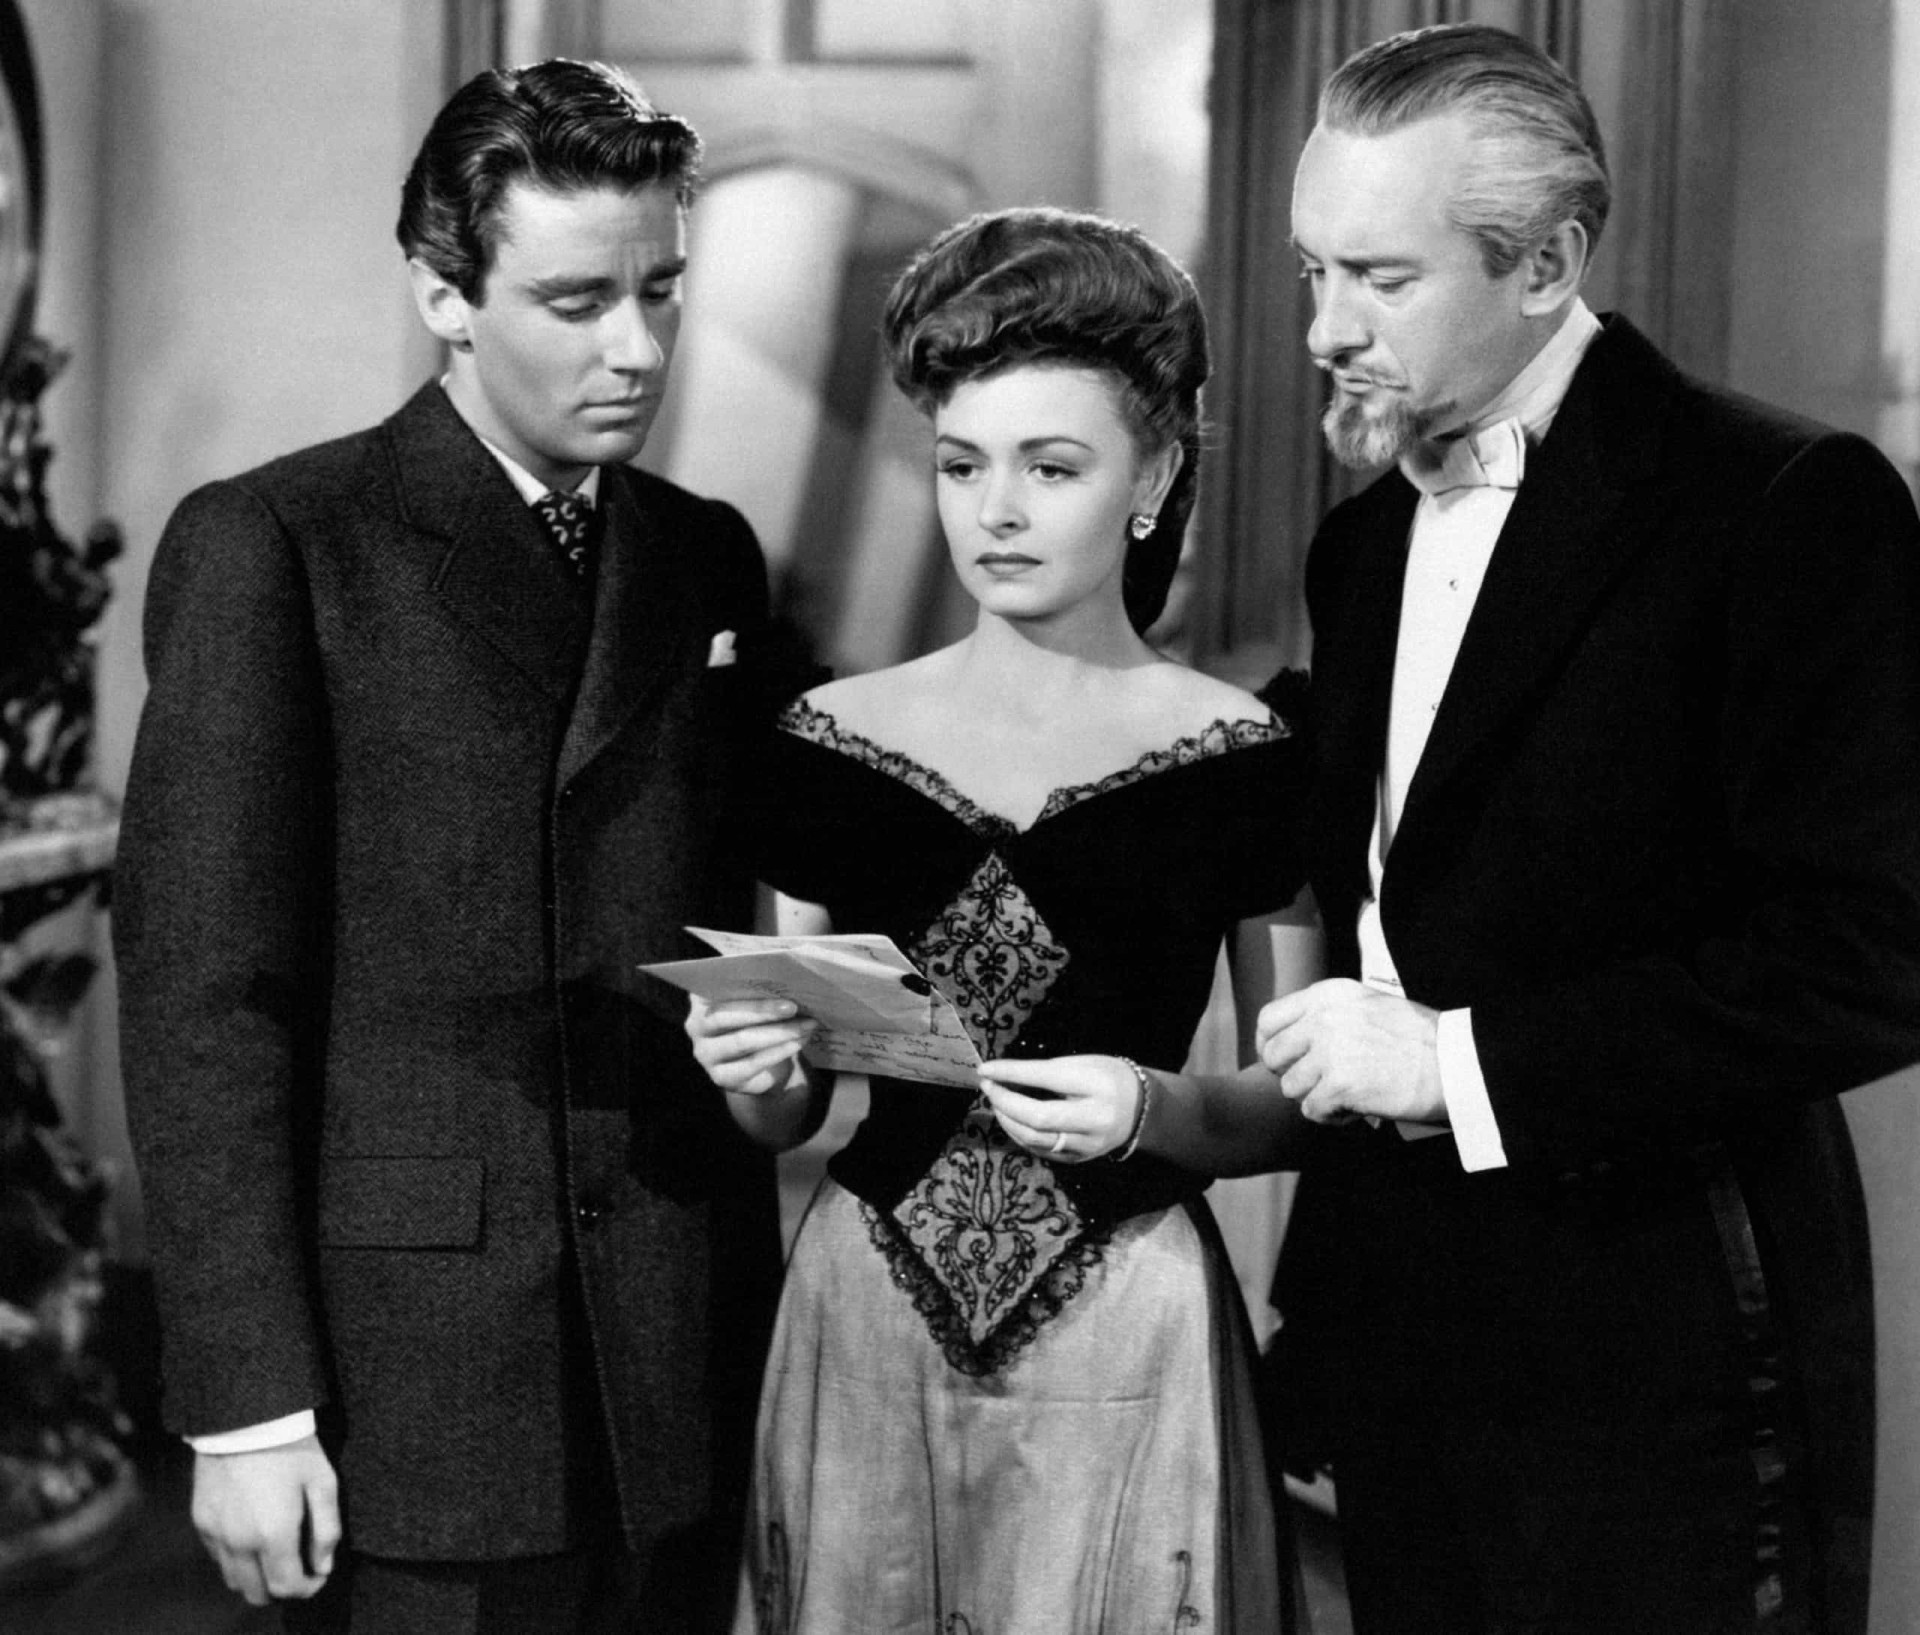 <p>Considered by many as the best film version of the novel, this 1945 production stars Hurd Hatfield as Dorian Gray, Lowell Gilmore as Basil Hallward, George Sanders as Henry Wotton, and <a href="https://www.starsinsider.com/celebrity/404015/incredible-facts-about-angela-lansbury-you-probably-dont-know" rel="noopener">Angela Lansbury</a> as Sibyl Vane. Pictured are two other stars of the film, Peter Lawford and Donna Reed, together with Sanders.</p><p>You may also like:<a href="https://www.starsinsider.com/n/308725?utm_source=msn.com&utm_medium=display&utm_campaign=referral_description&utm_content=443911v5en-us"> TV and film tragedies: cast and crew who died on set</a></p>